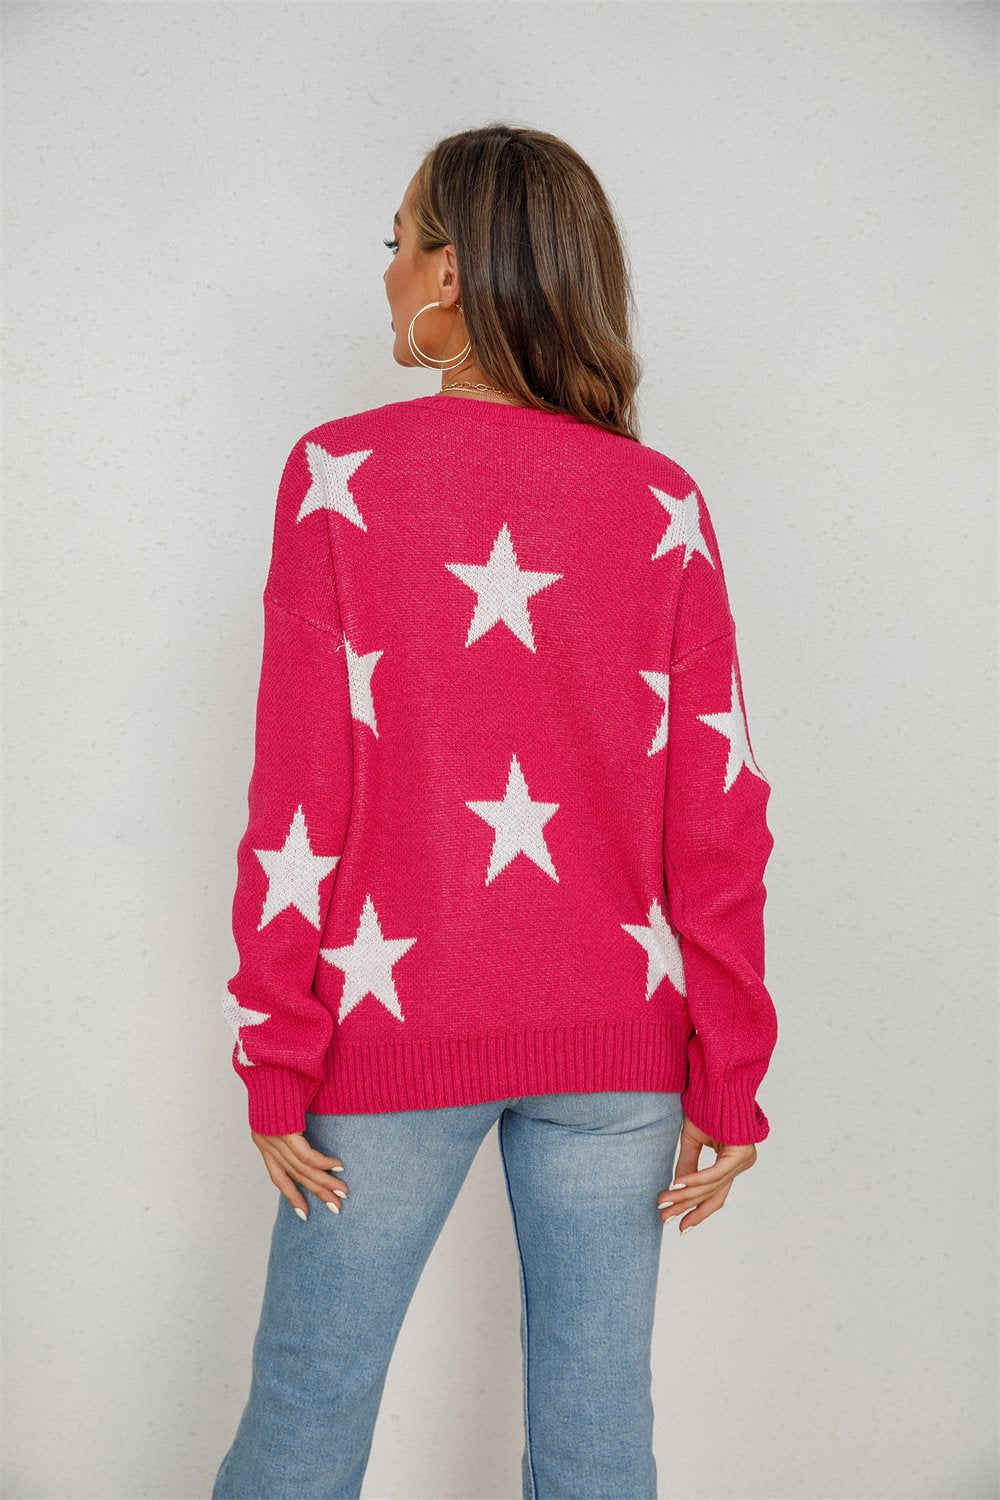 RTS: Be a STAR Sweater High Quality*